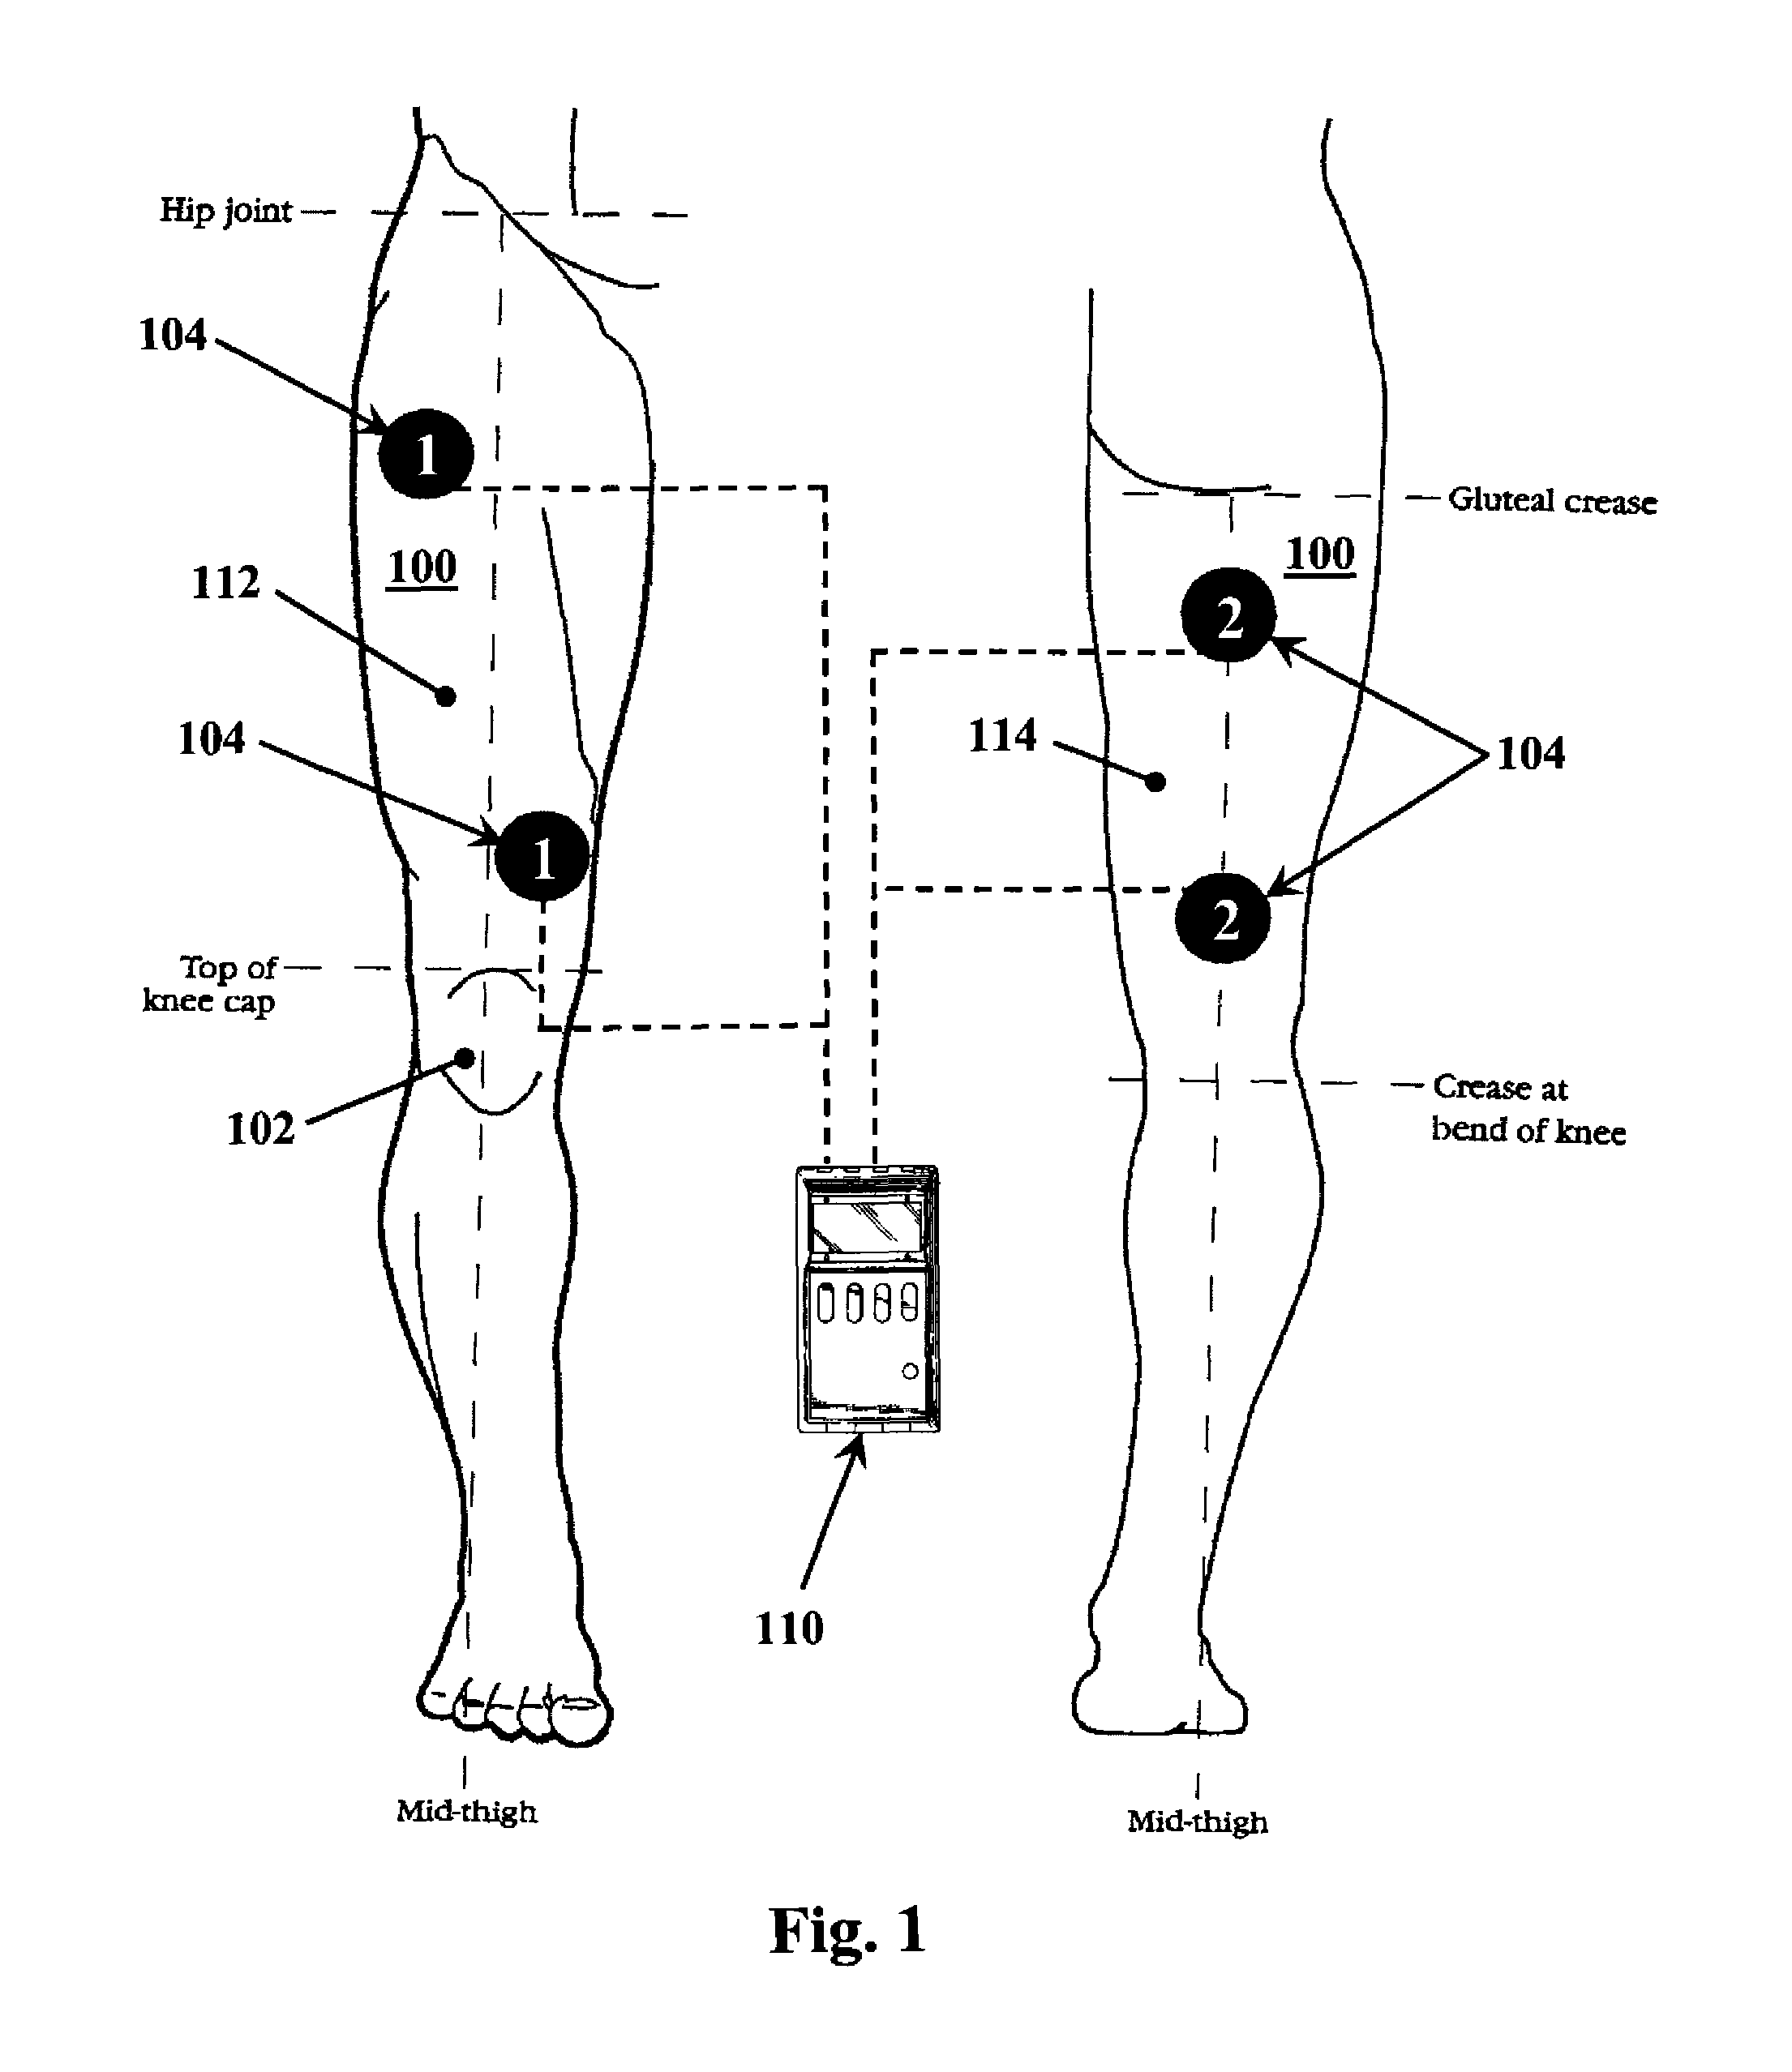 Methods for improving mobility and controlling cartilage matrix degradation of weight-bearing articular joints